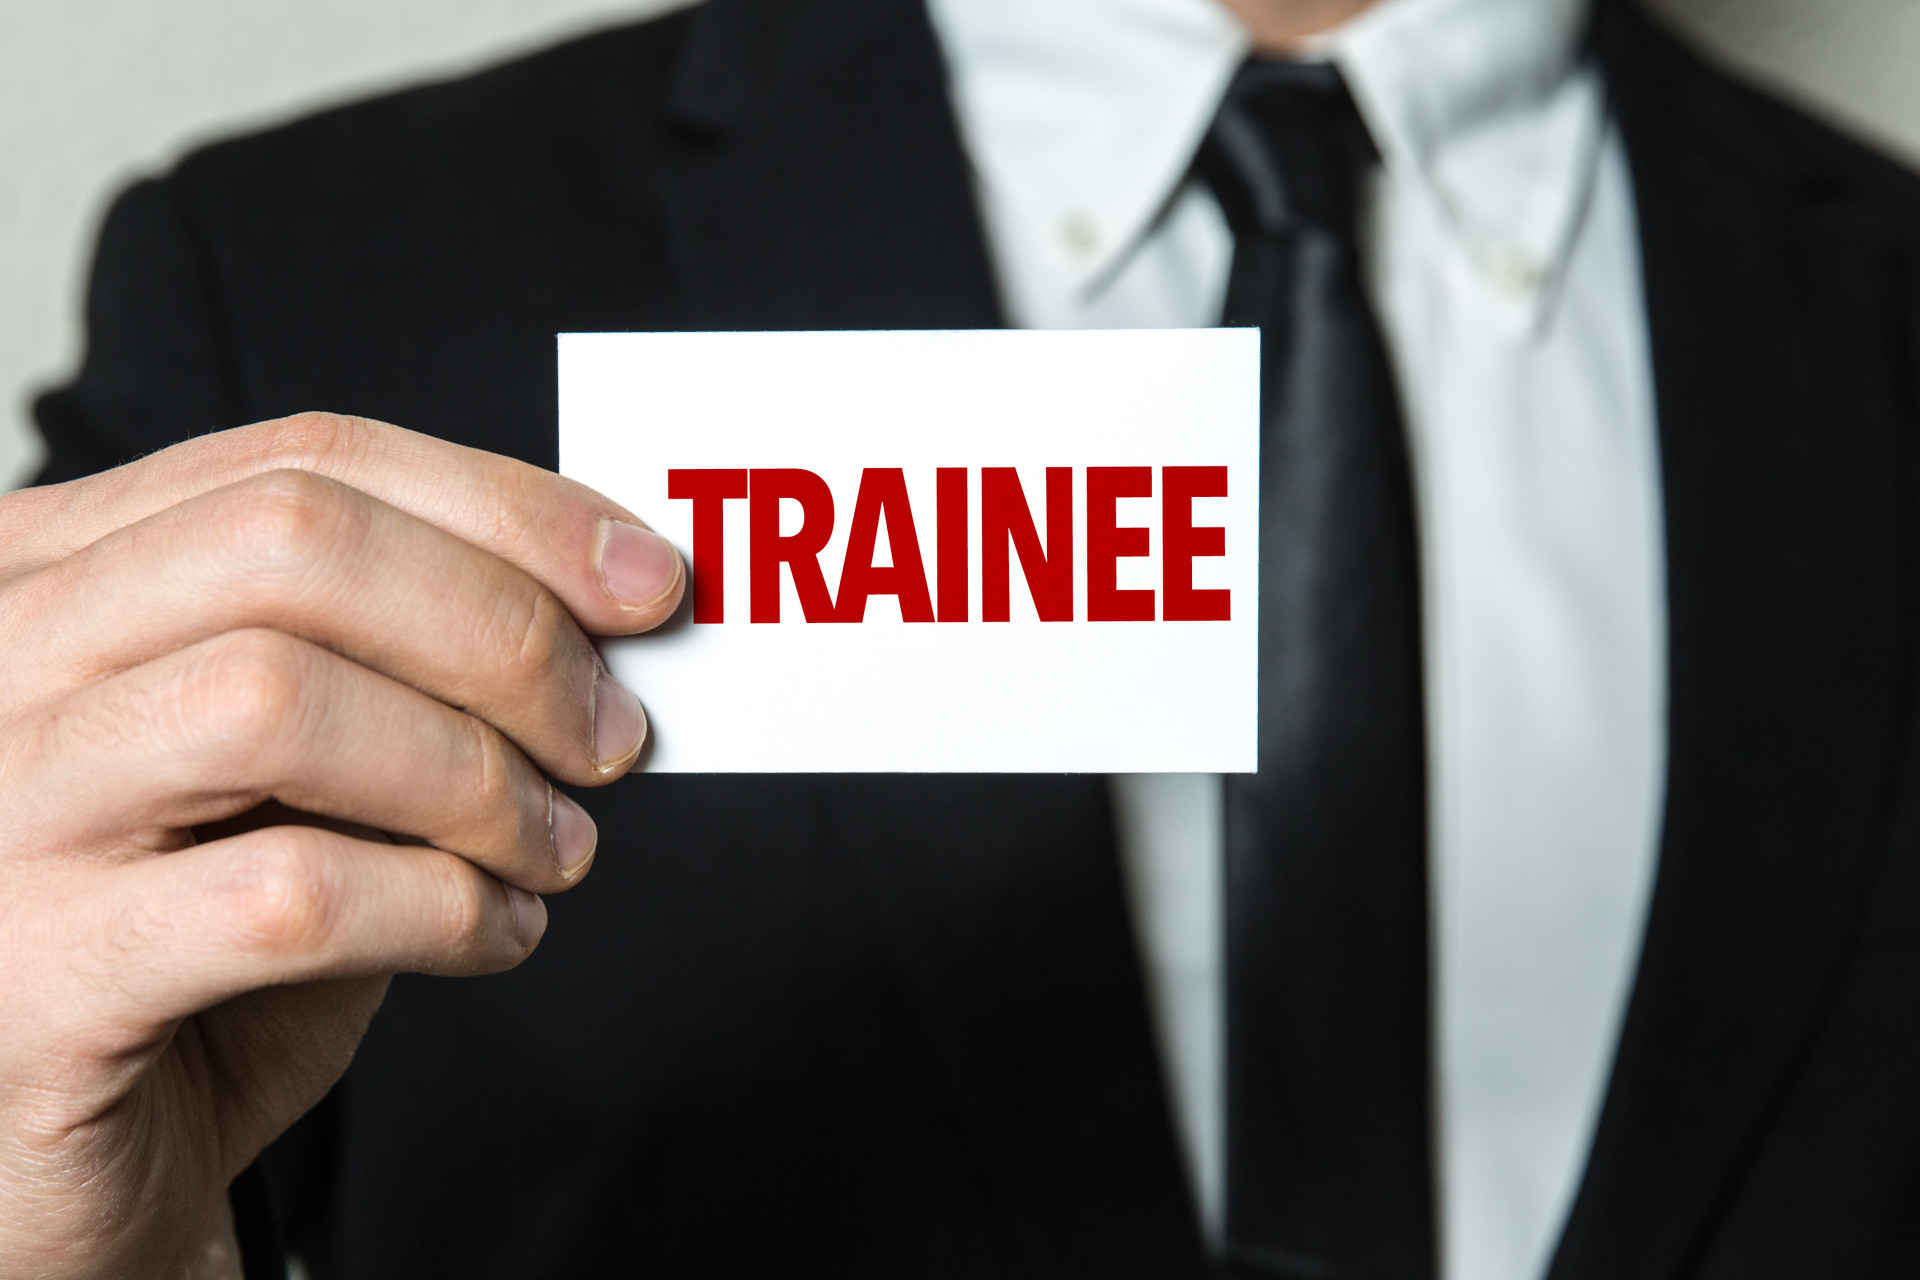 Many big companies offer trainee programs, and there is often a specific type of program for graduates. Want to know how these work? Keep clicking!<p><a href="https://www.msn.com/en-us/community/channel/vid-7xx8mnucu55yw63we9va2gwr7uihbxwc68fxqp25x6tg4ftibpra?cvid=94631541bc0f4f89bfd59158d696ad7e">Follow us and access great exclusive content every day</a></p>